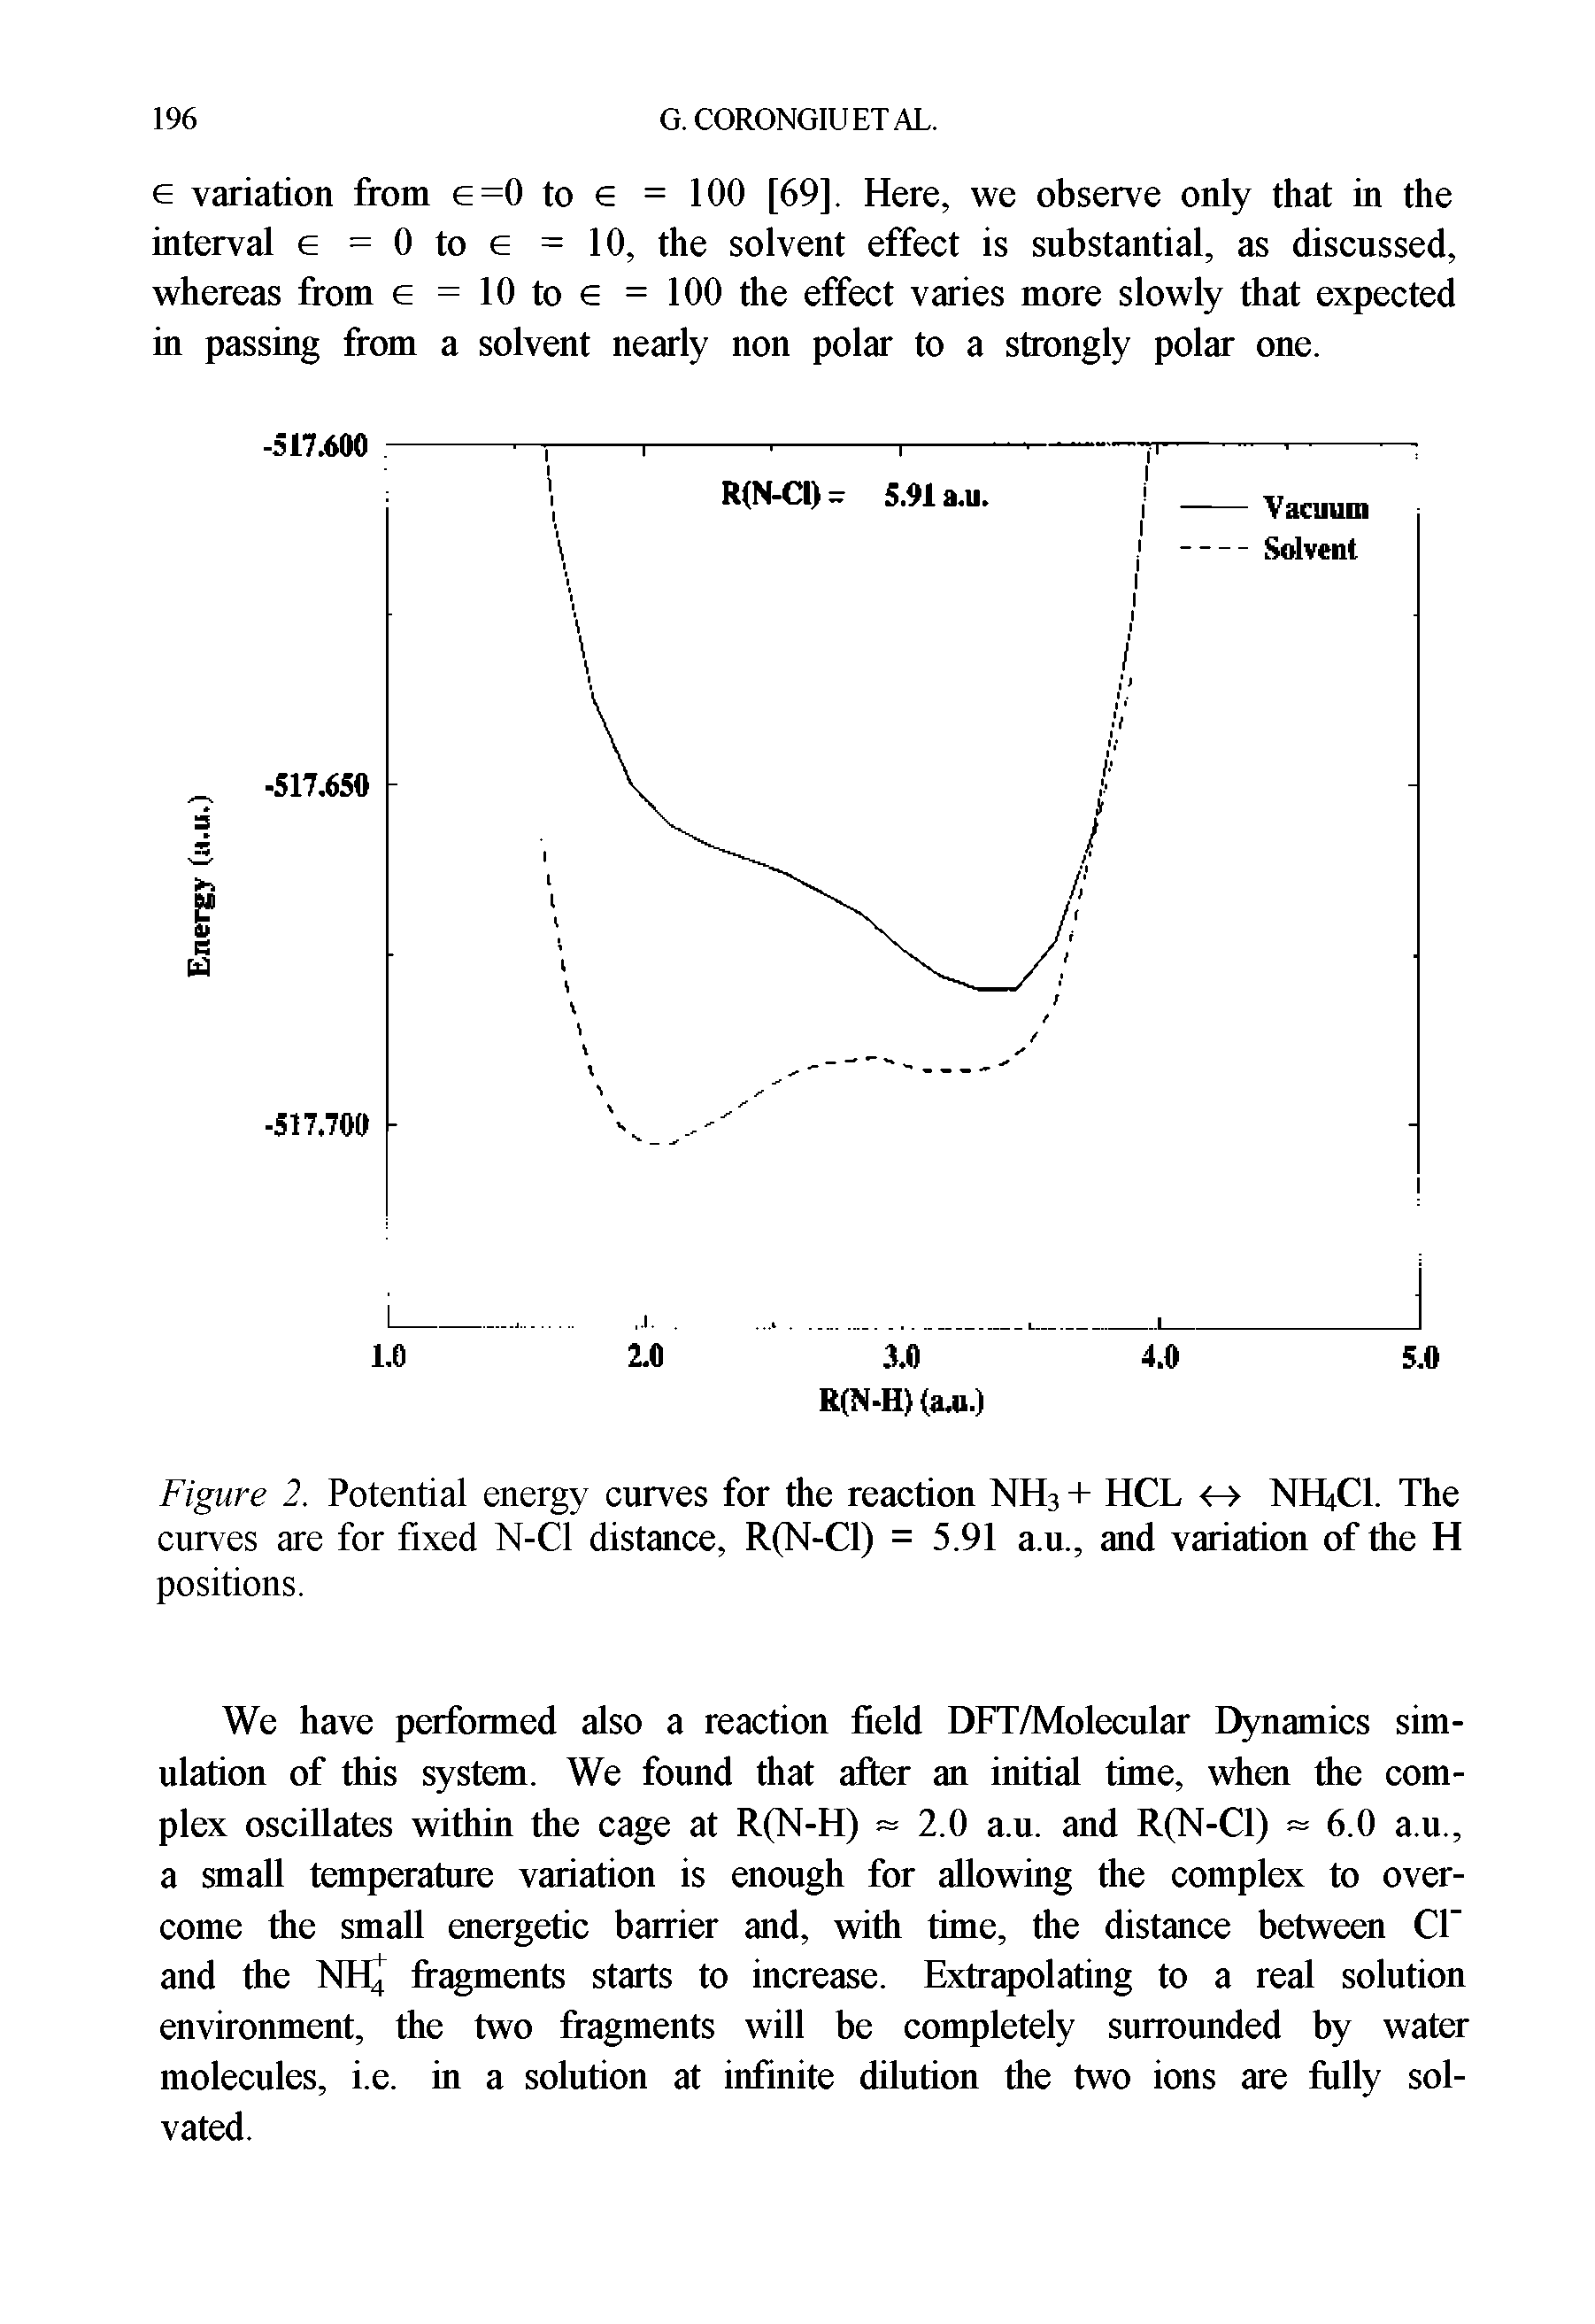 Figure 2. Potential energy curves for the reaction NH3 + HCL NH4CI. The curves are for fixed N-Cl distance, R(N-C1) = 5.91 a.u., and variation of the H positions.